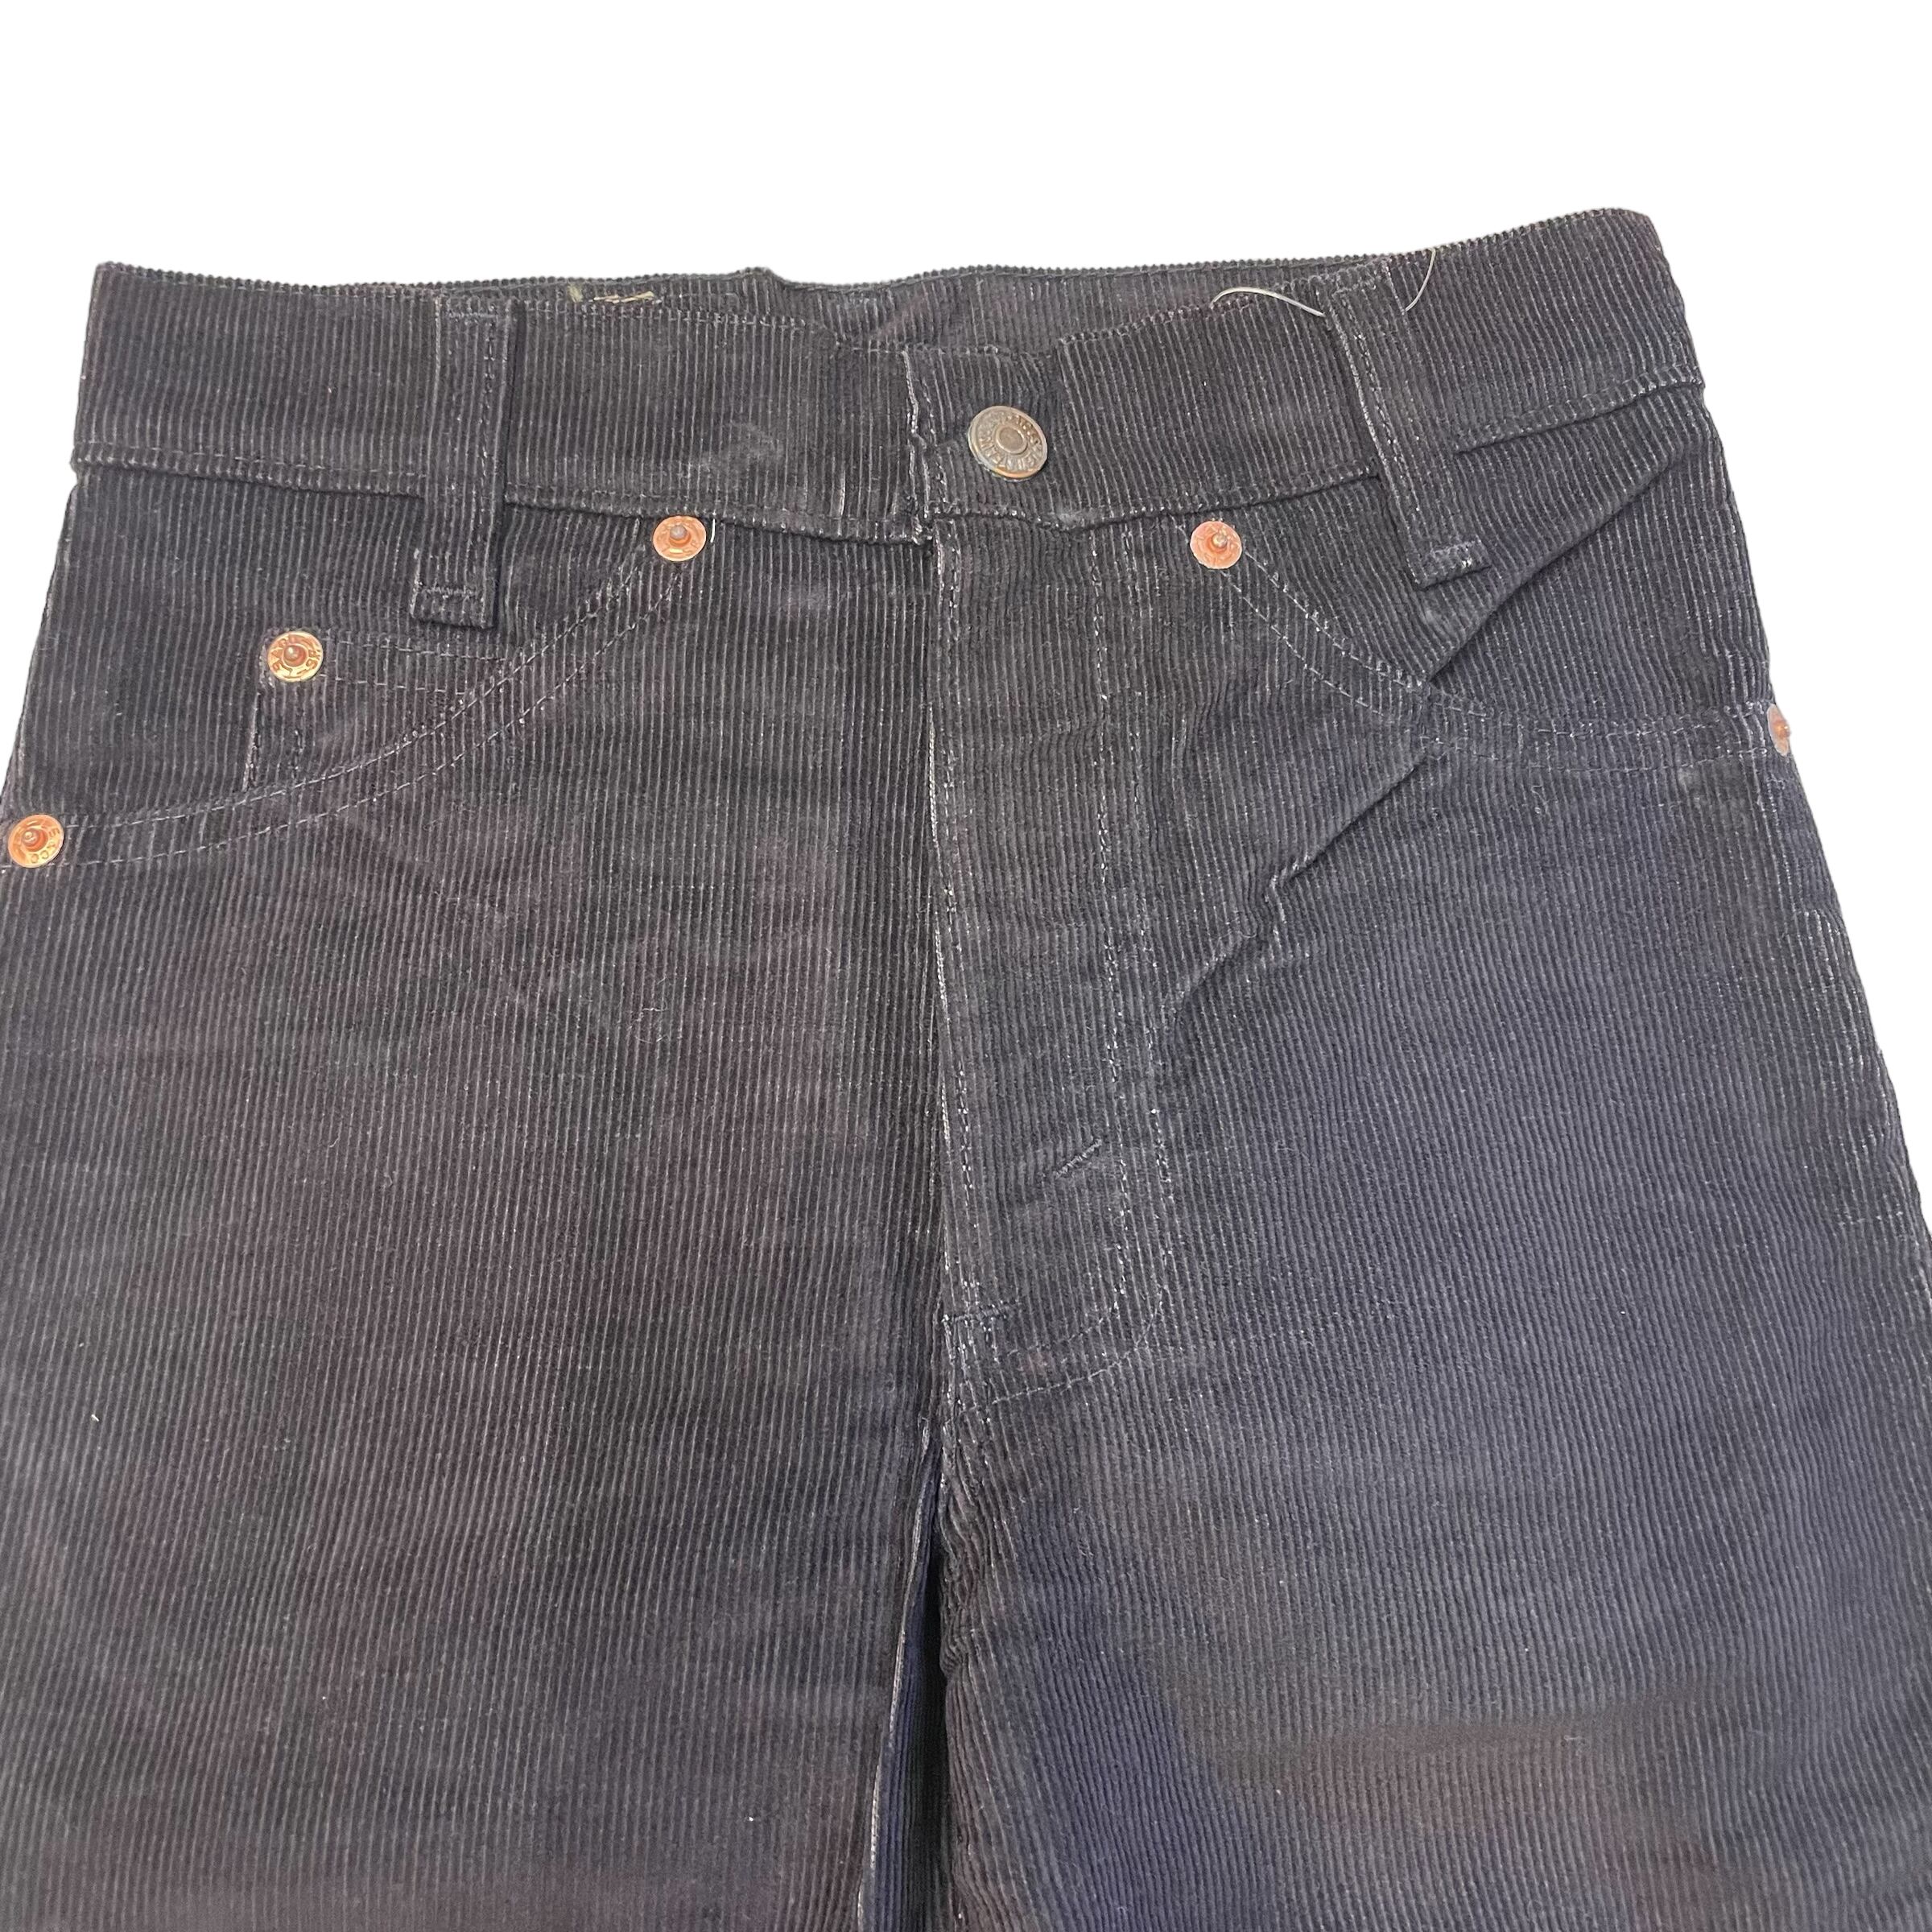 Dead stock 80's Levi's 416 boots cut corduroy pants Black made in